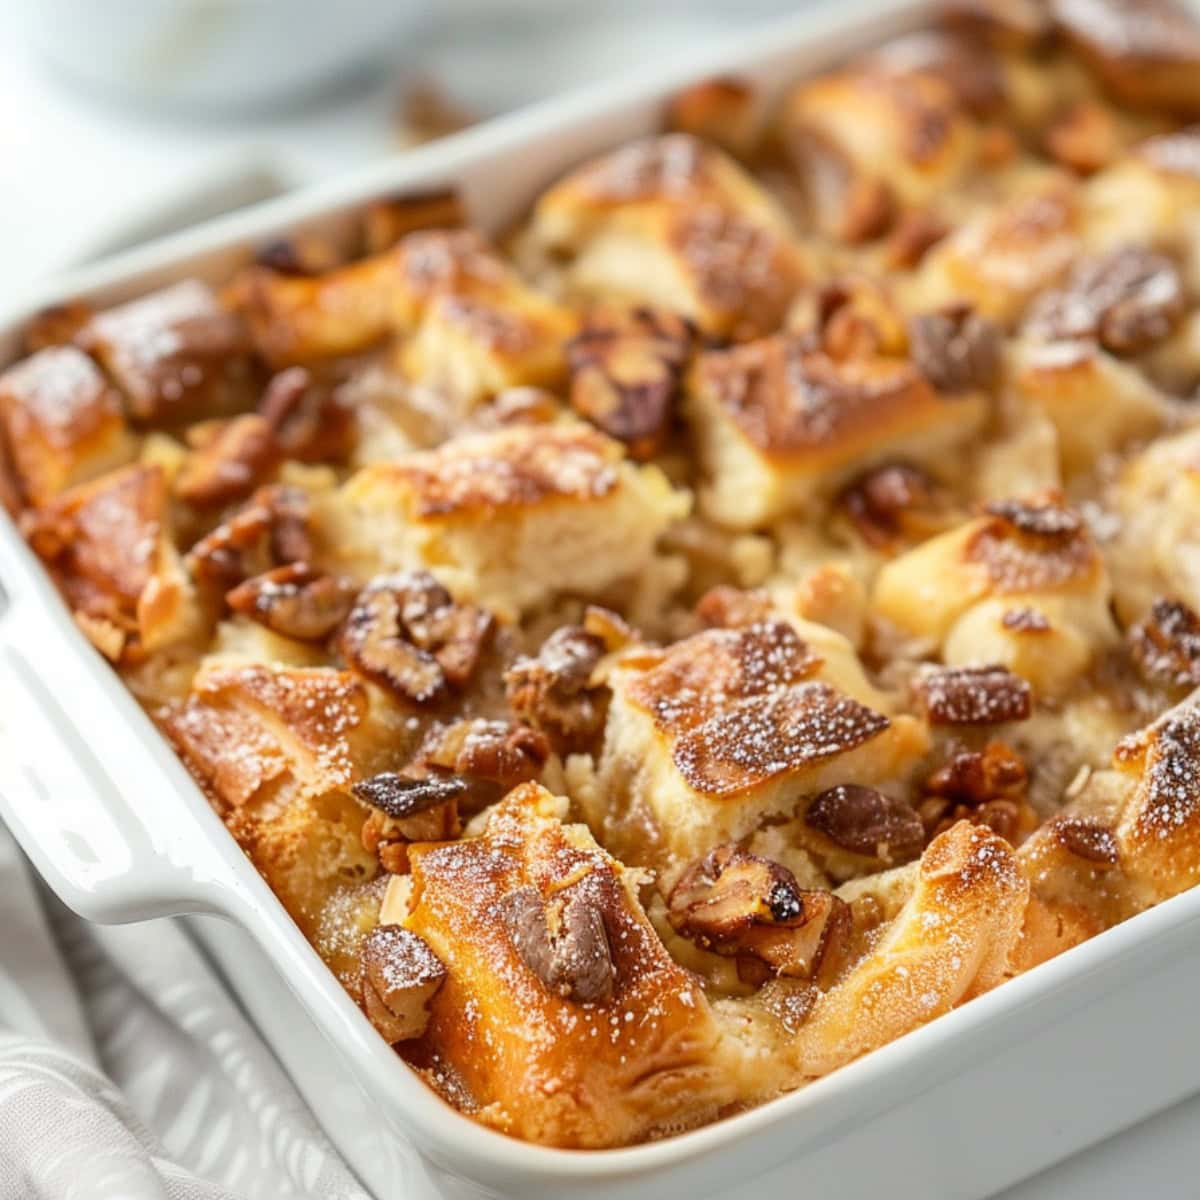 Apple pie bread pudding in a rectangular baking dish.